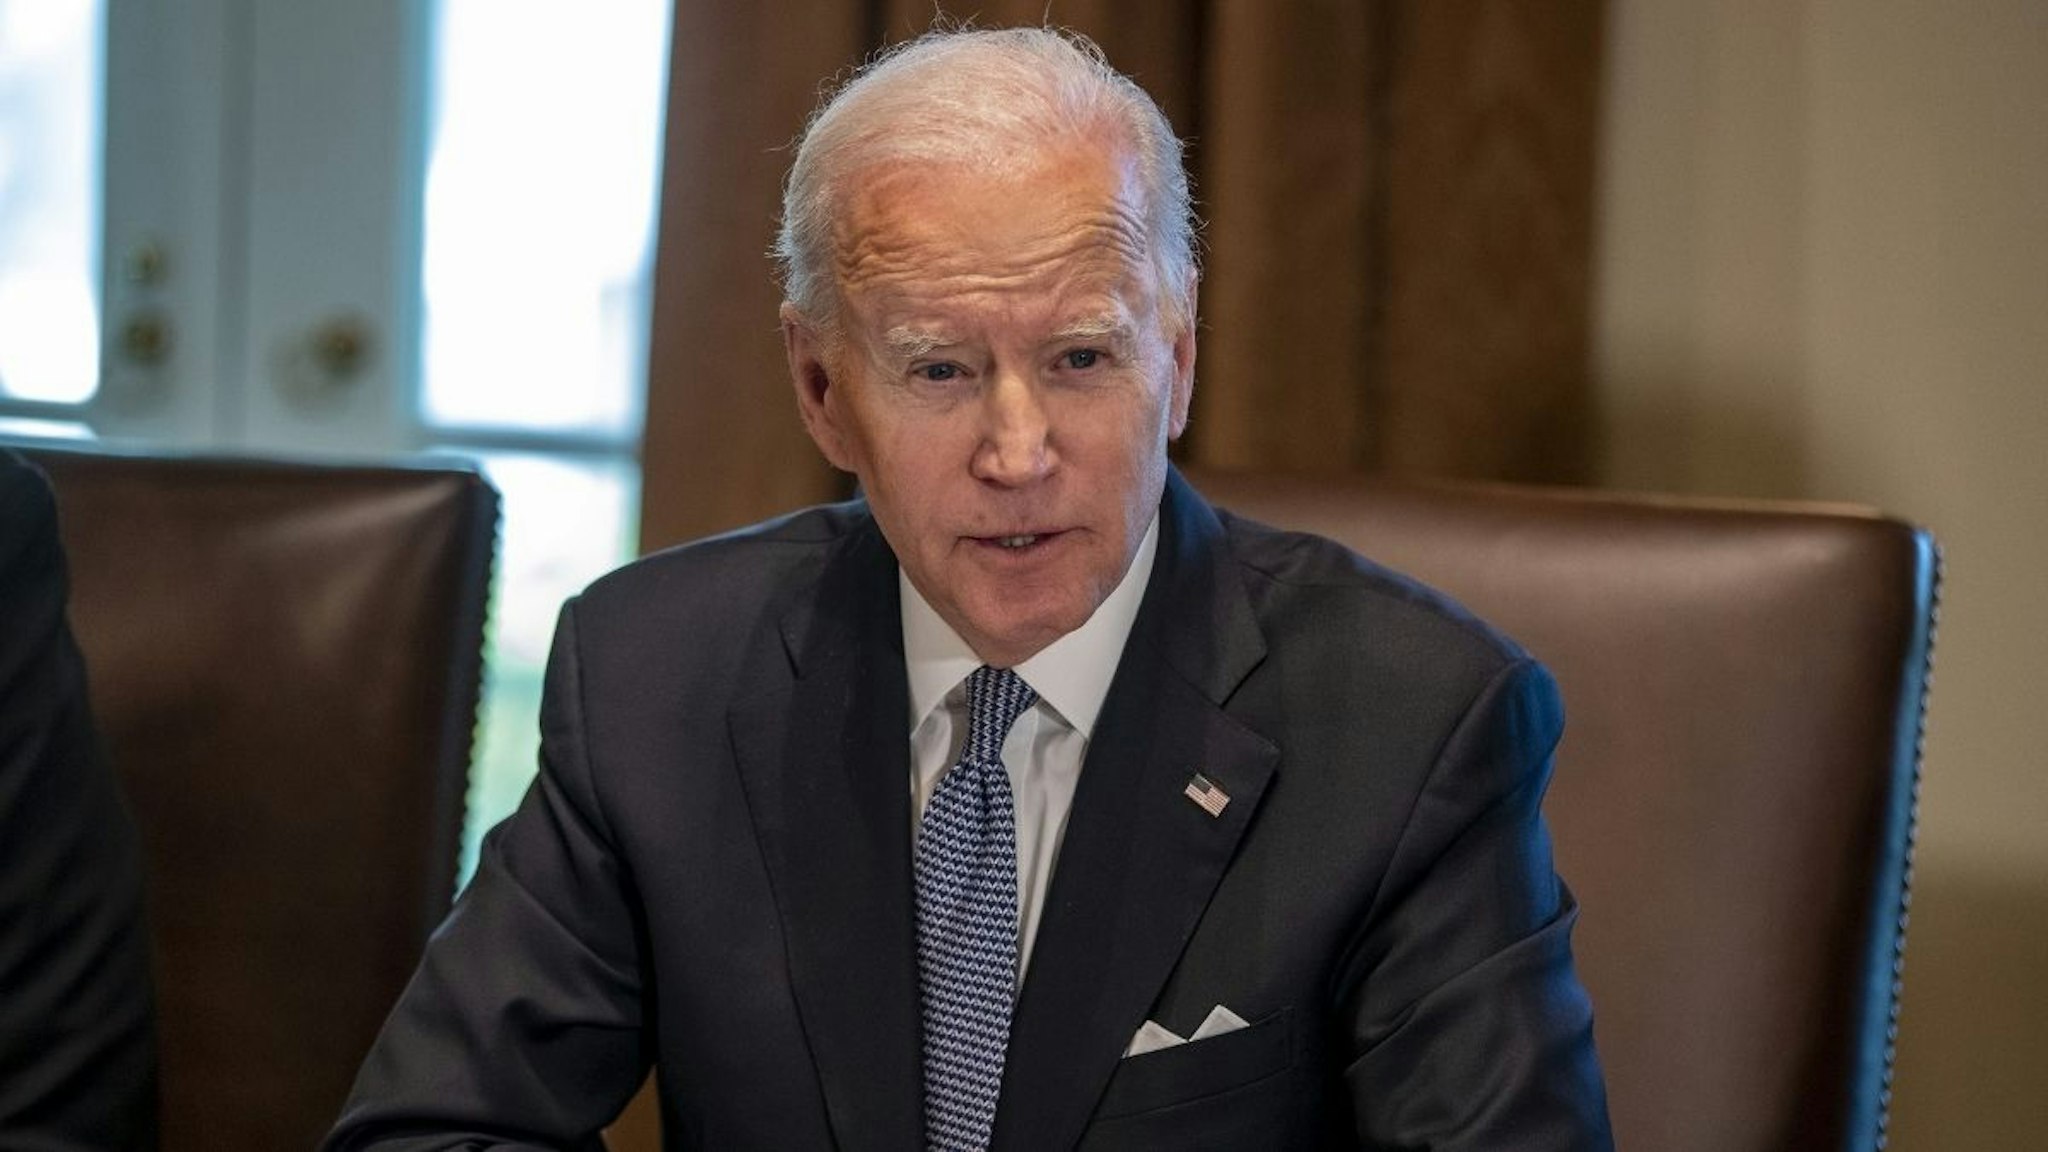 U.S. President Joe Biden speaks during a meeting in the Cabinet Room of the White House in Washington, D.C., U.S., on Wednesday, April 20, 2022.